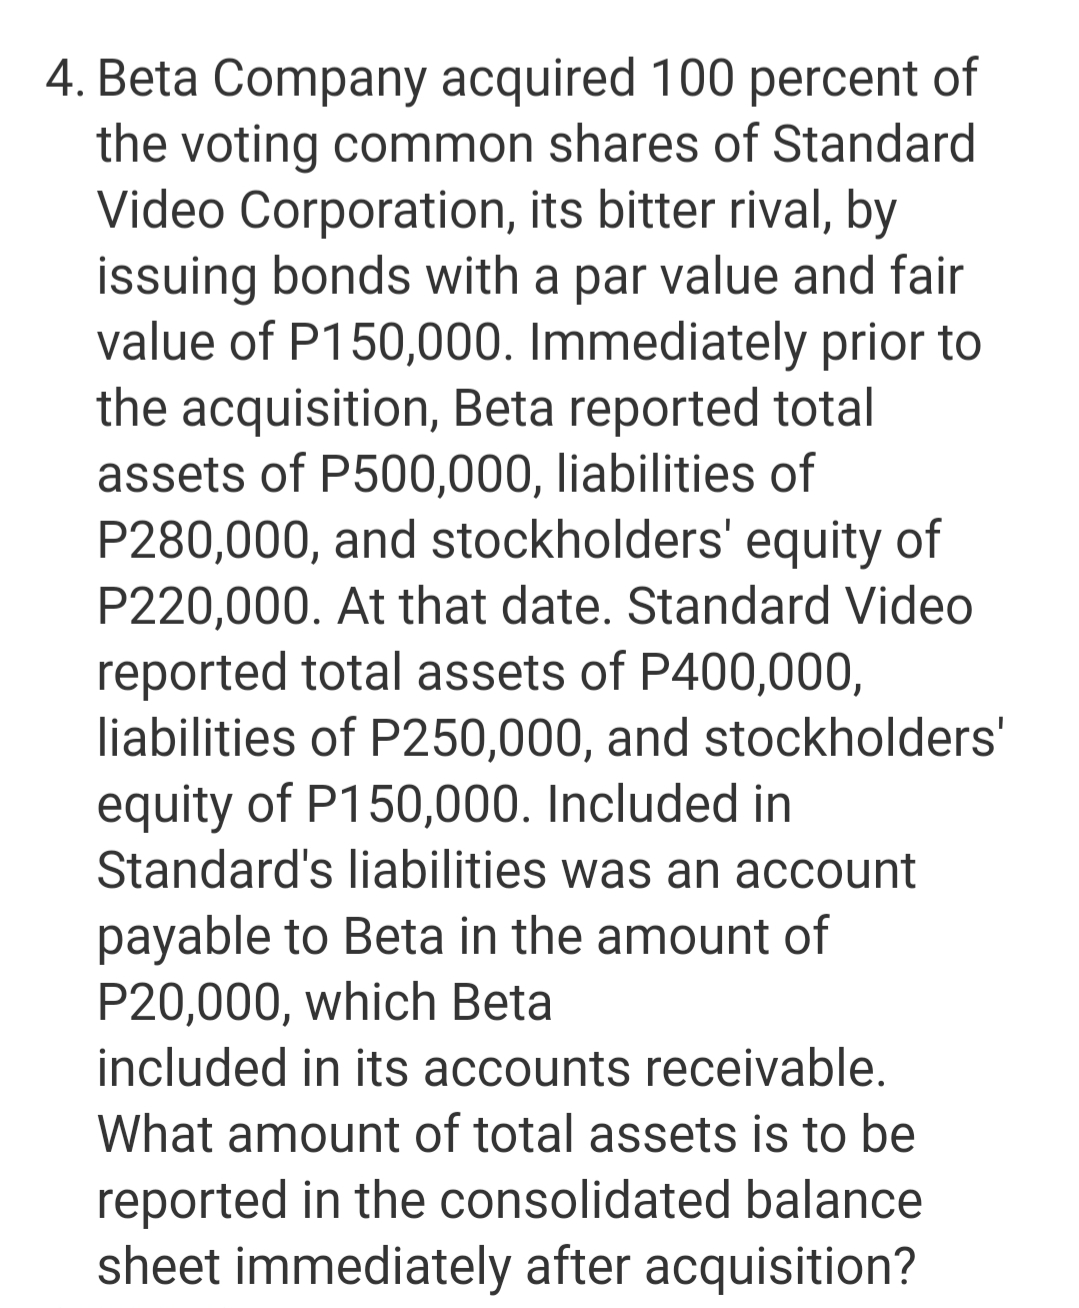 4. Beta Company acquired 100 percent of
the voting common shares of Standard
Video Corporation, its bitter rival, by
issuing bonds with a par value and fair
value of P150,000. Immediately prior to
the acquisition, Beta reported total
assets of P500,000, liabilities of
P280,000, and stockholders' equity of
P220,000. At that date. Standard Video
reported total assets of P400,000,
liabilities of P250,000, and stockholders'
equity of P150,000. Included in
Standard's liabilities was an account
payable to Beta in the amount of
P20,000, which Beta
included in its accounts receivable.
What amount of total assets is to be
reported in the consolidated balance
sheet immediately after acquisition?
